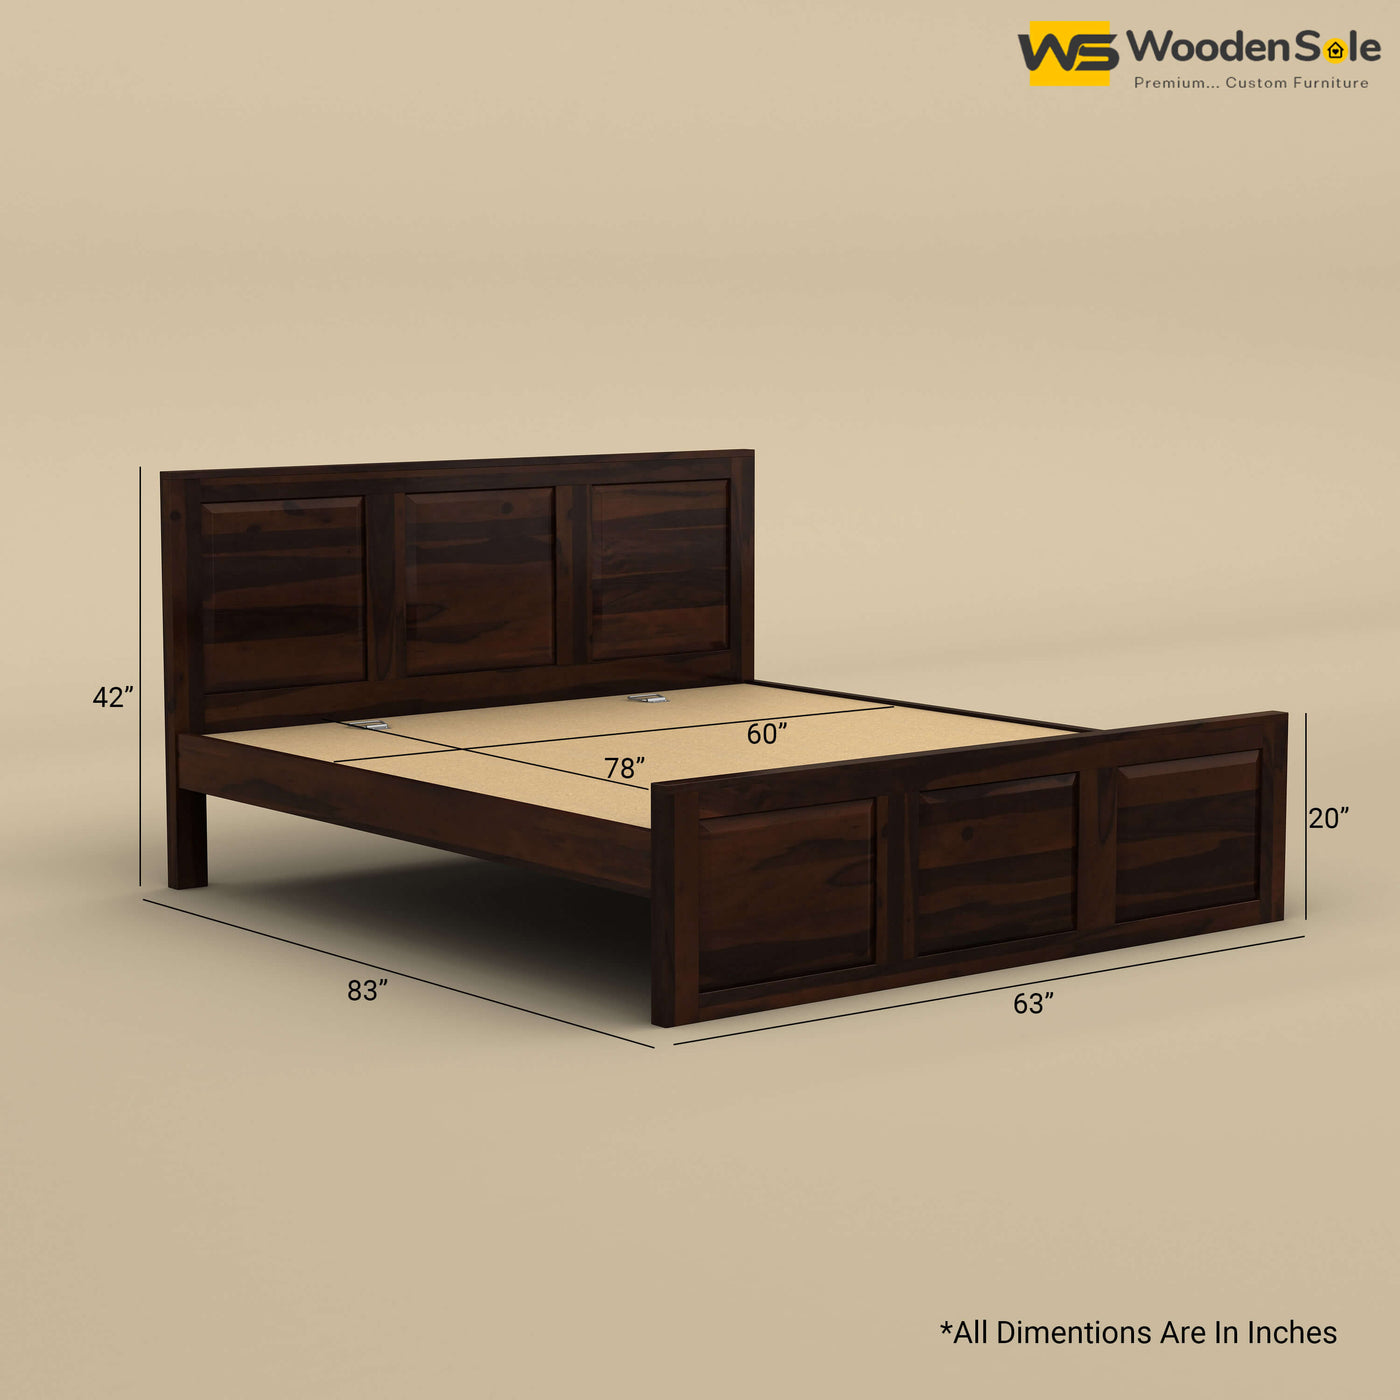 Big Diamond Without Storage Bed (Queen Size, Walnut Finish)